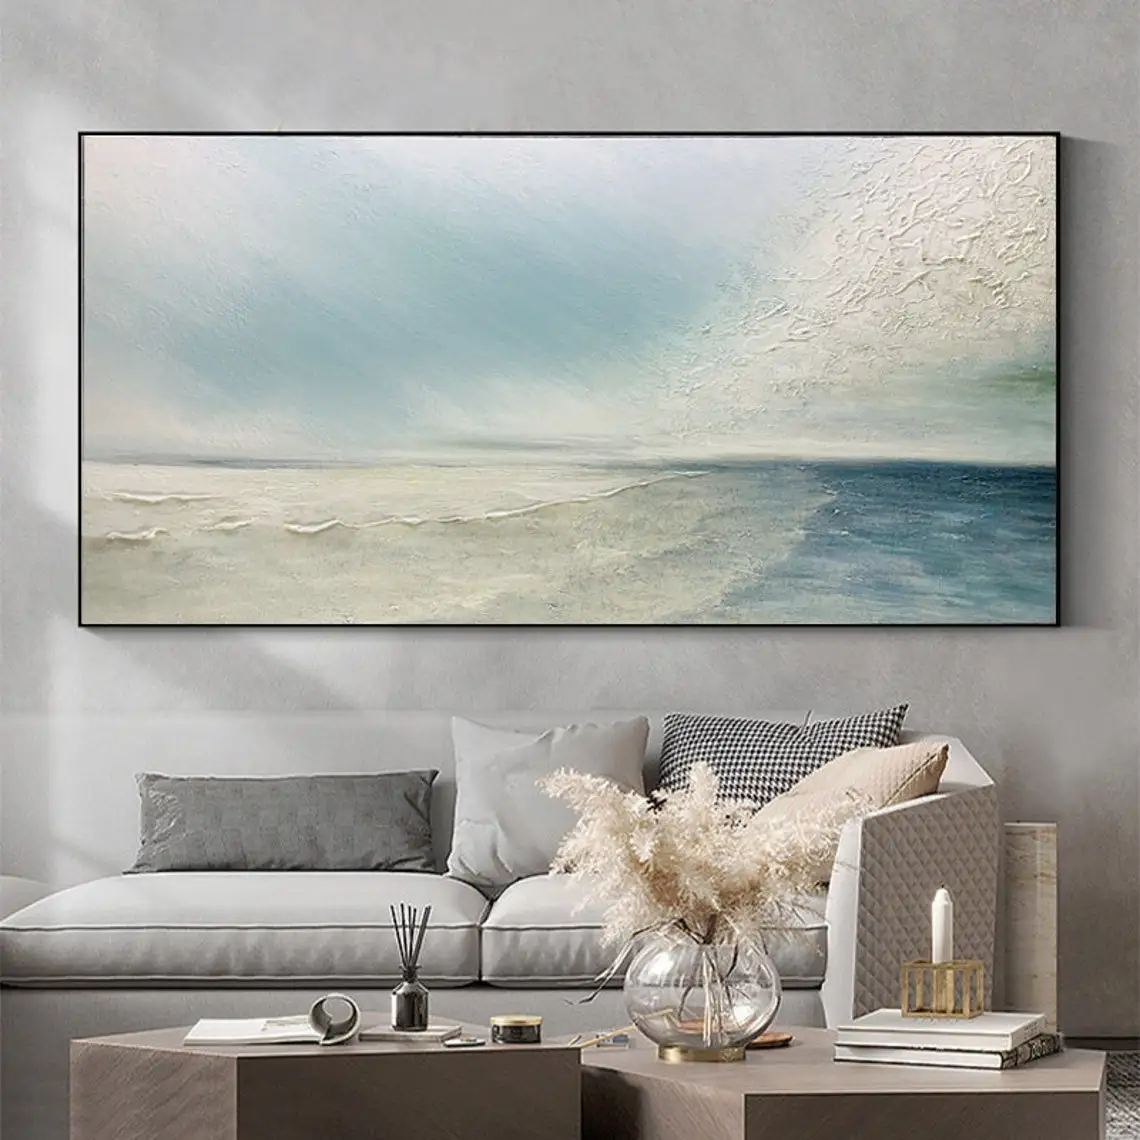 

Sandy Beach Ocean Hand Painted Oil Painting On Canvas Blue Sky White Clouds Abstract Seascape Coastal Painting Large Wall Art